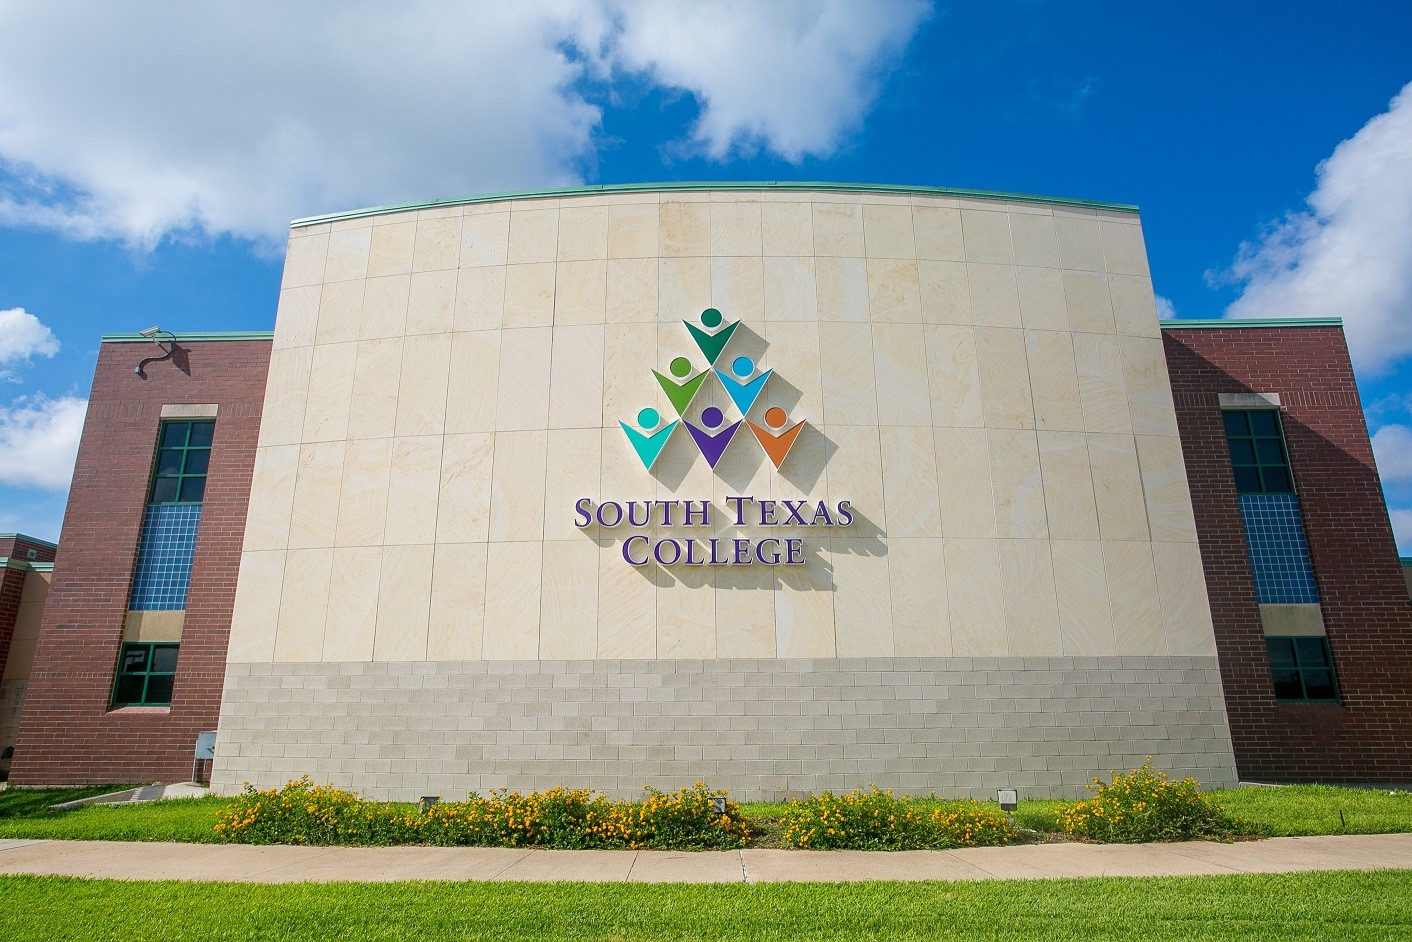 Photo credit: South Texas College website